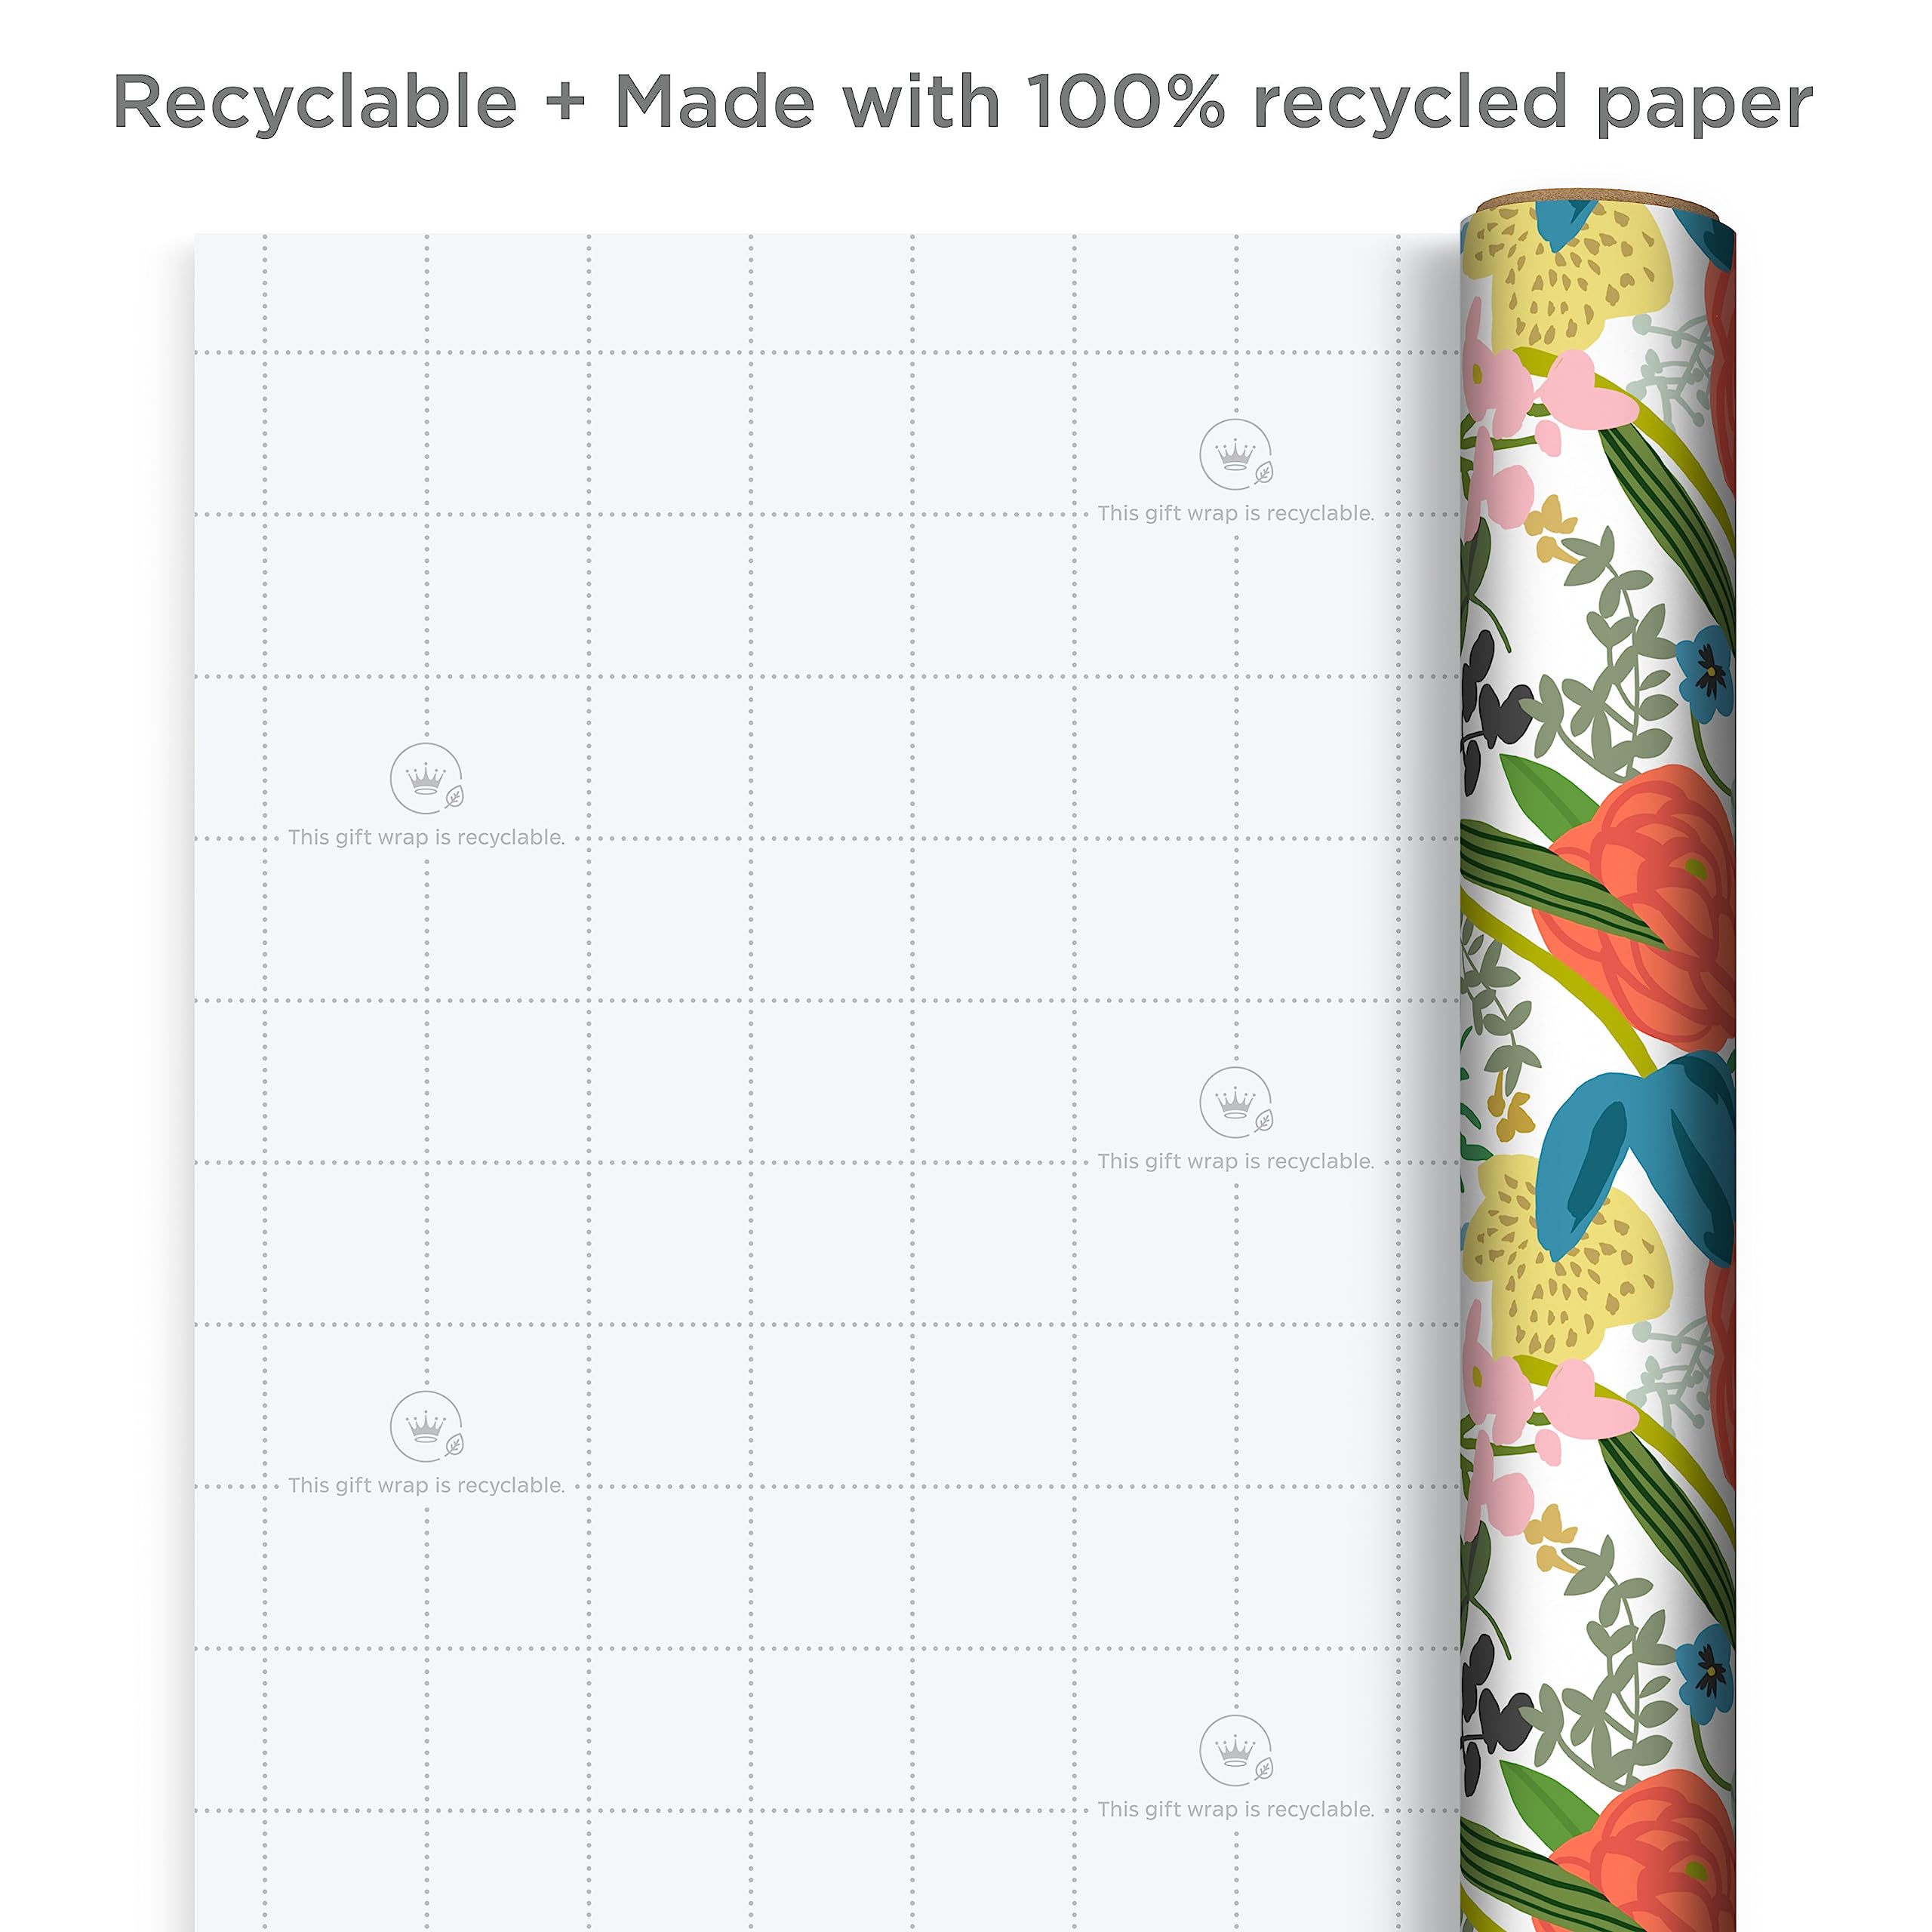 Hallmark Recycled Wrapping Paper with Cutlines on Reverse (3 Rolls: 60 Sq. Ft. Ttl) Modern Flowers, Teal Leaves, Black and White Abstract for Birthdays, Bridal Showers, Easter, Mother's Day